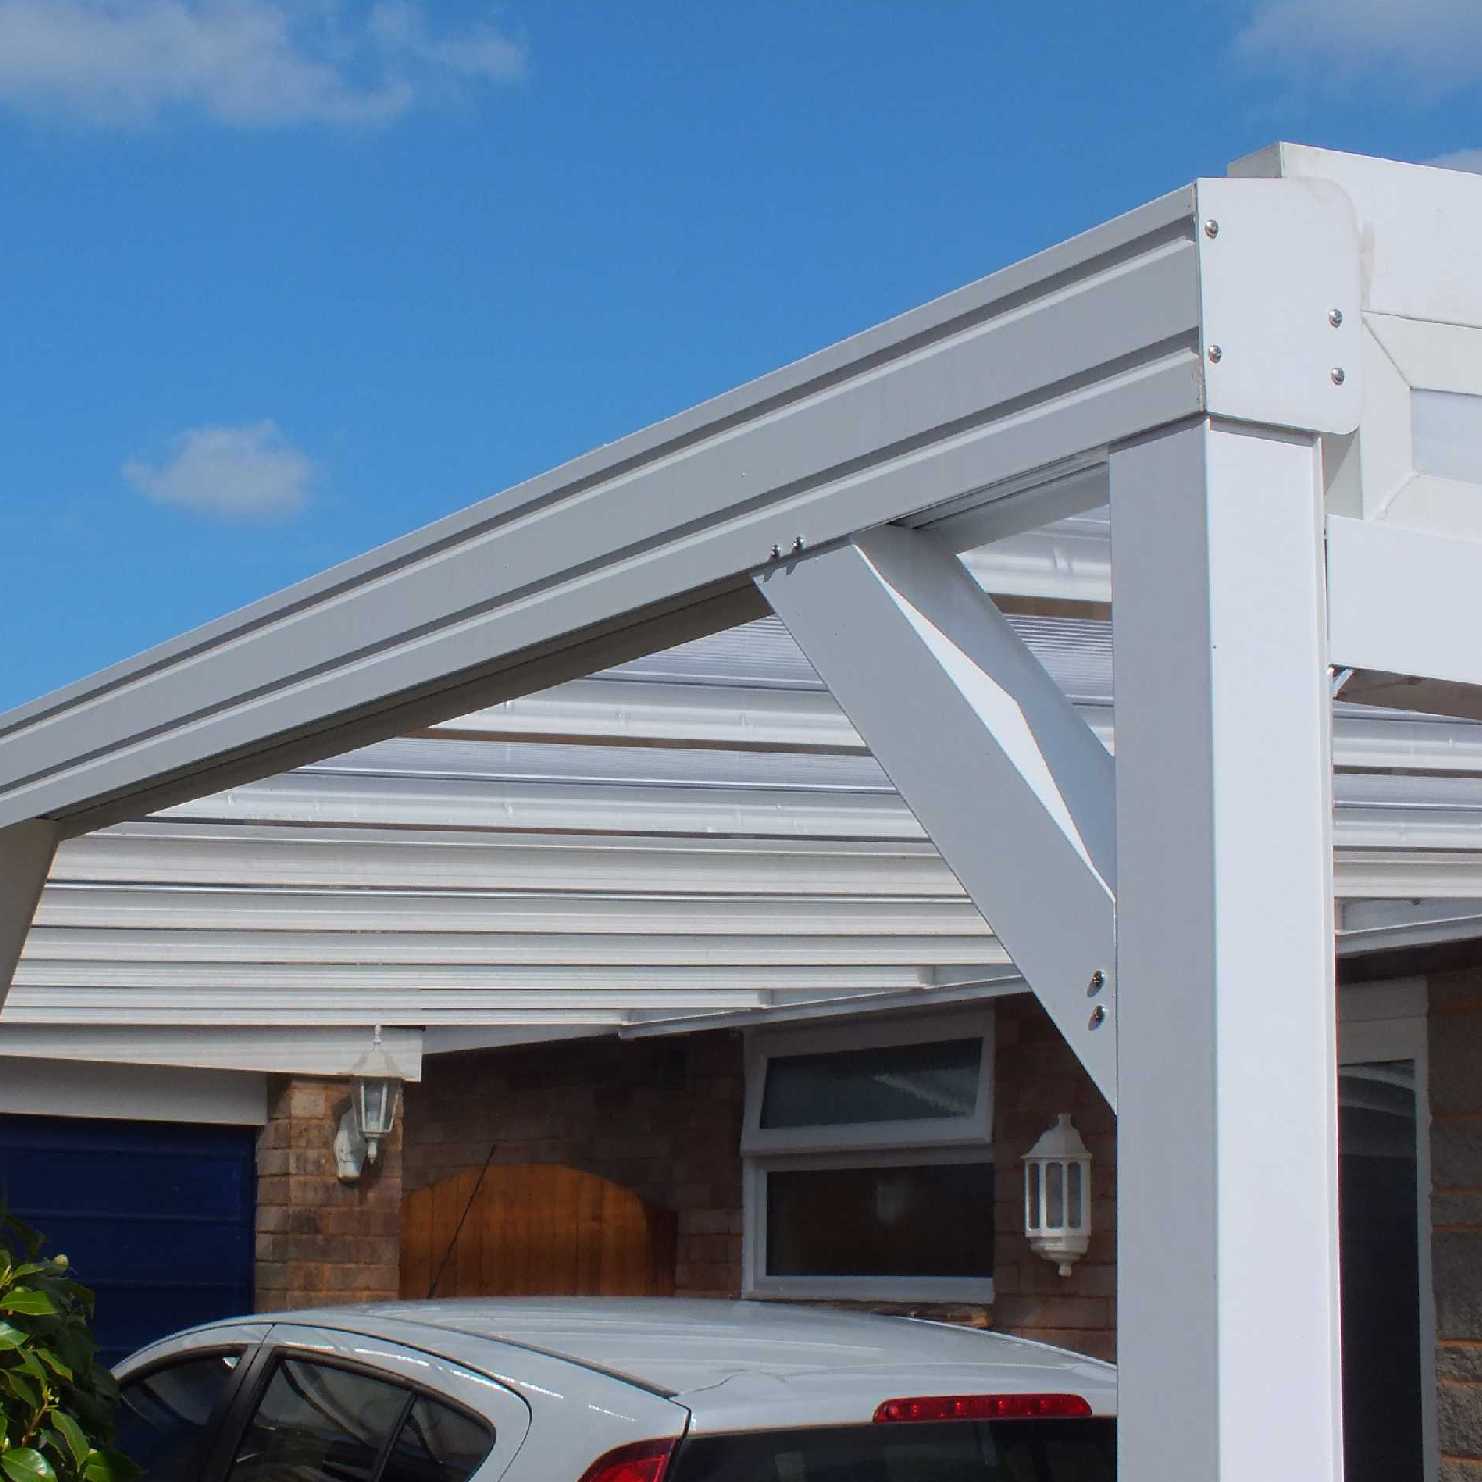 Buy Omega Smart Lean-To Canopy, White with 16mm Polycarbonate Glazing - 2.1m (W) x 2.0m (P), (2) Supporting Posts online today